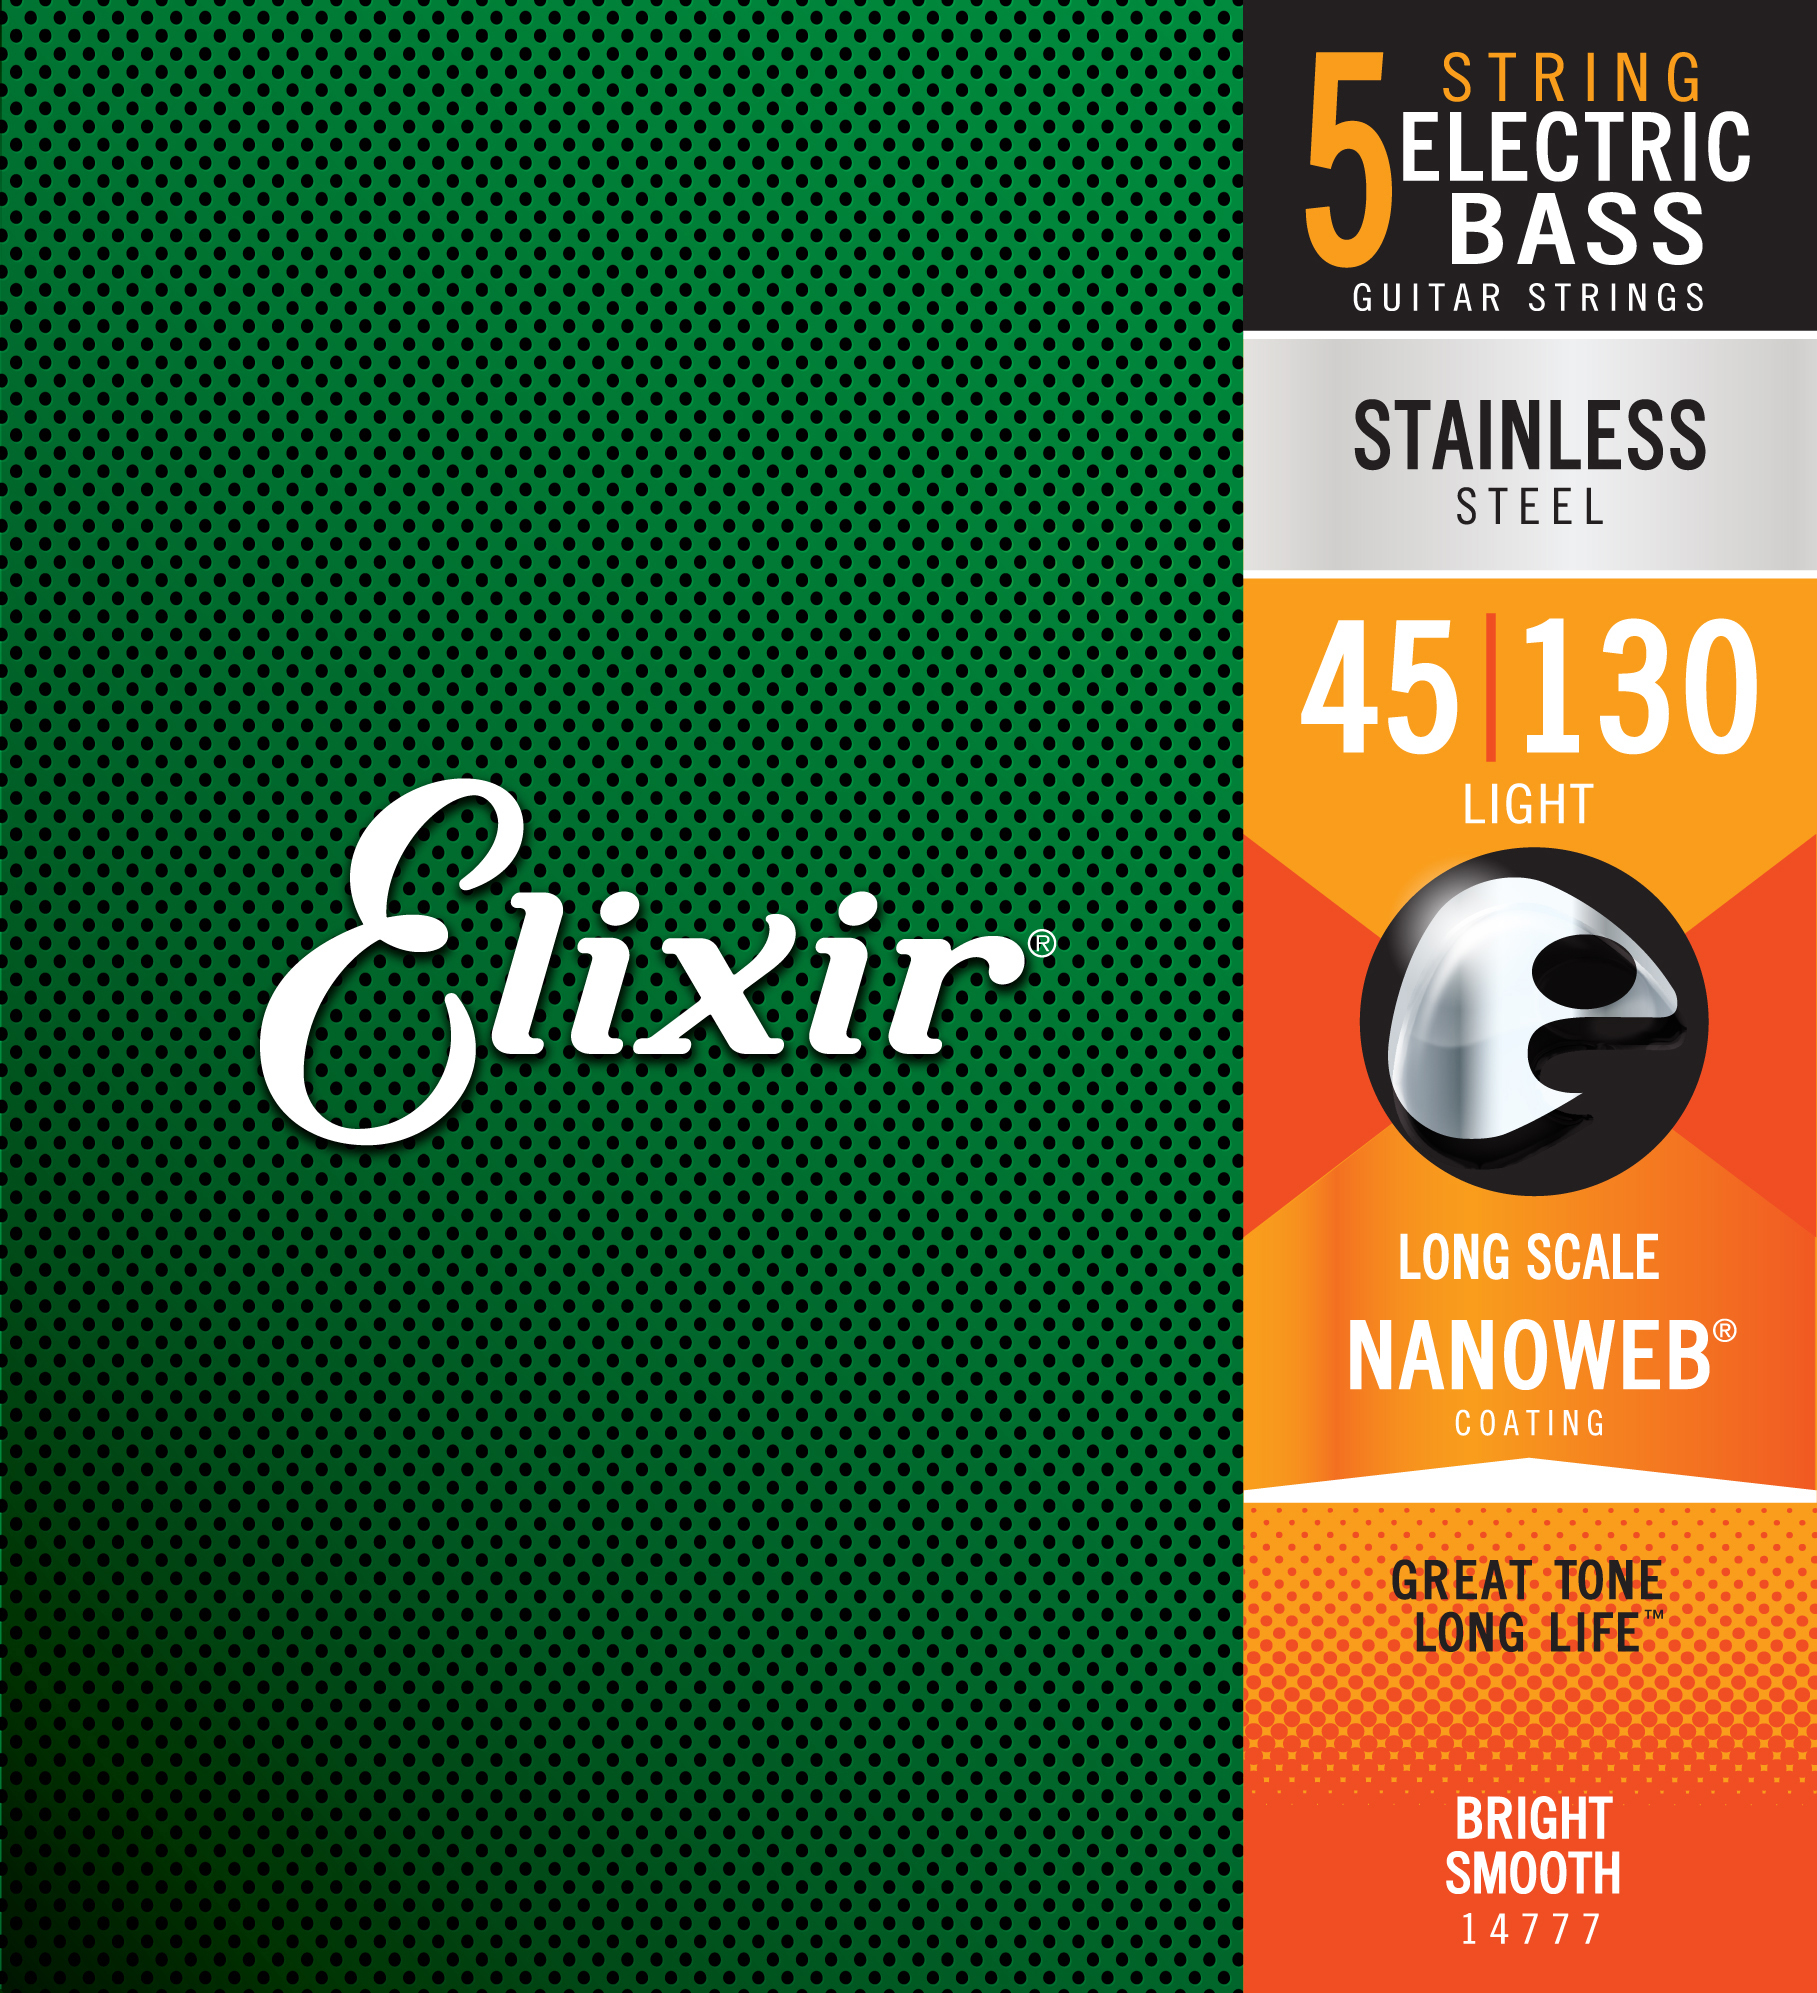 Elixir 14777 Nanoweb Stainless Steel Long Scale Electric Bass Light 5c 40-135 - Electric bass strings - Main picture